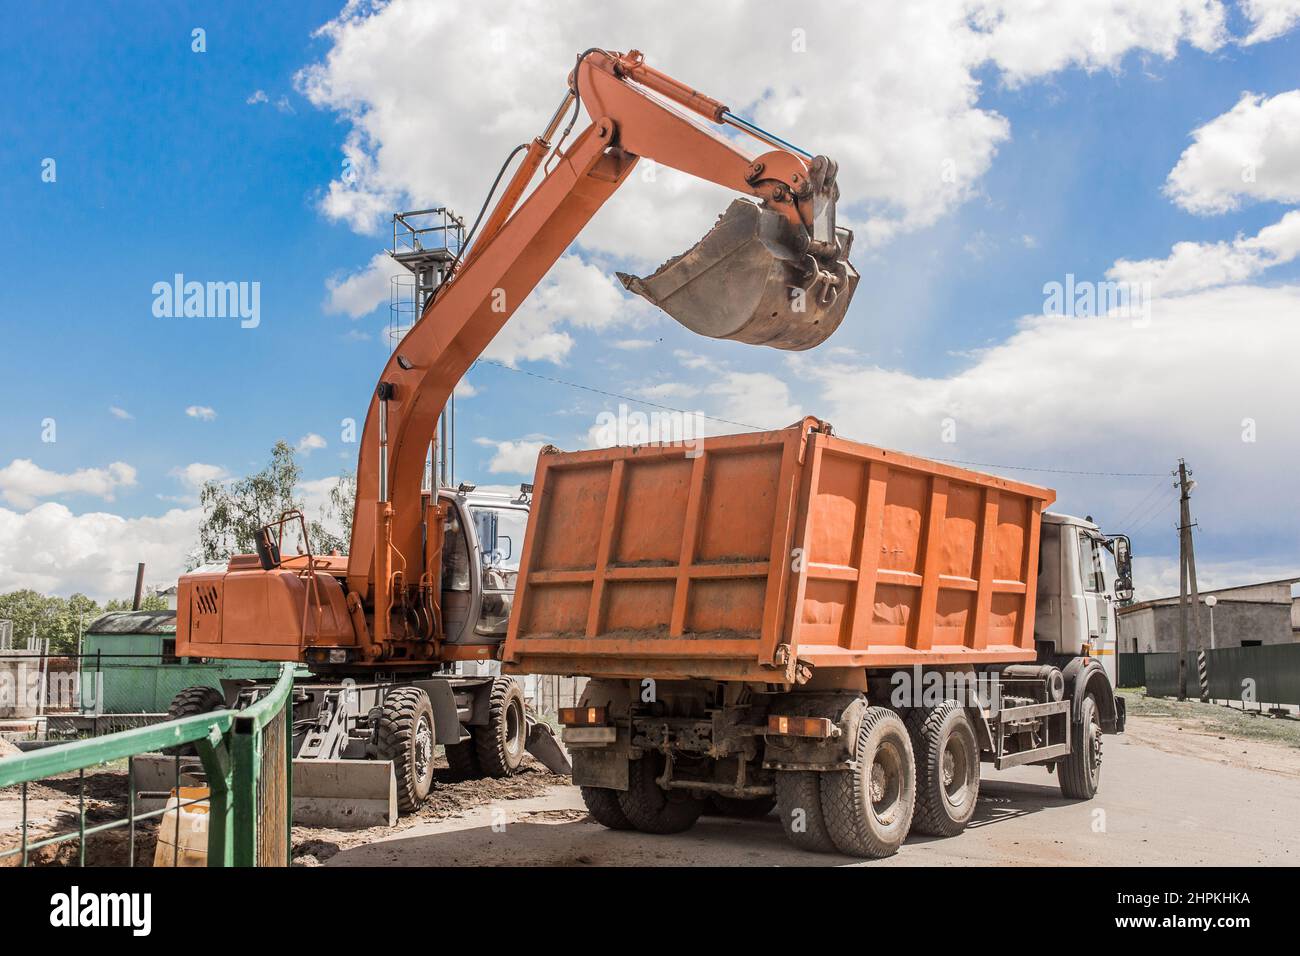 Excavation works. The bucket of the tractor loads the soil with a shovel into the back of a dump truck on the construction site. Stock Photo